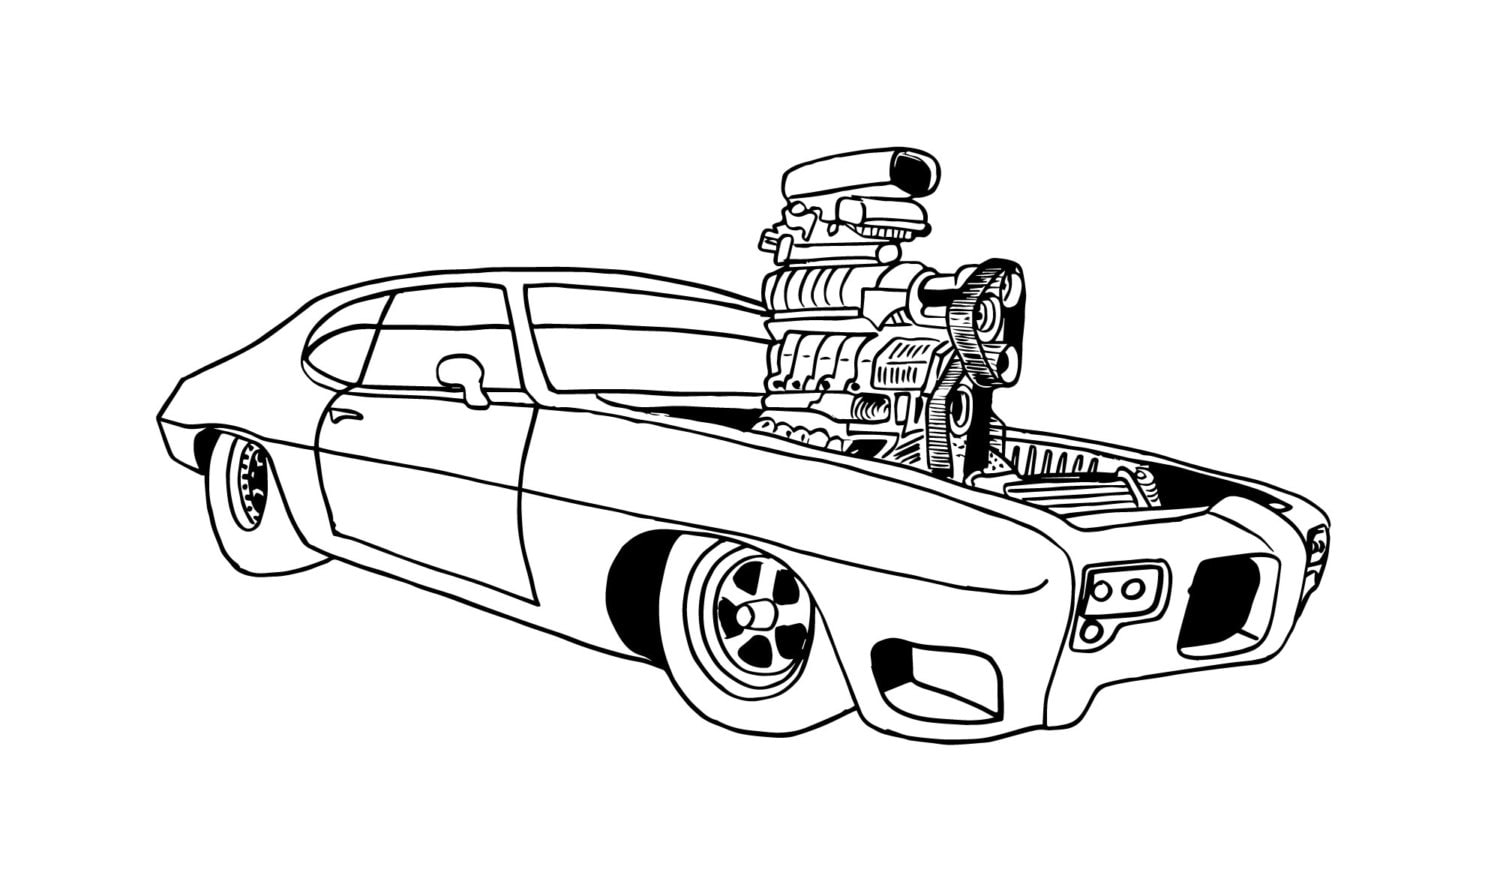 sale-55-18pcs-coloring-pages-muscle-cars-instant-download-etsy